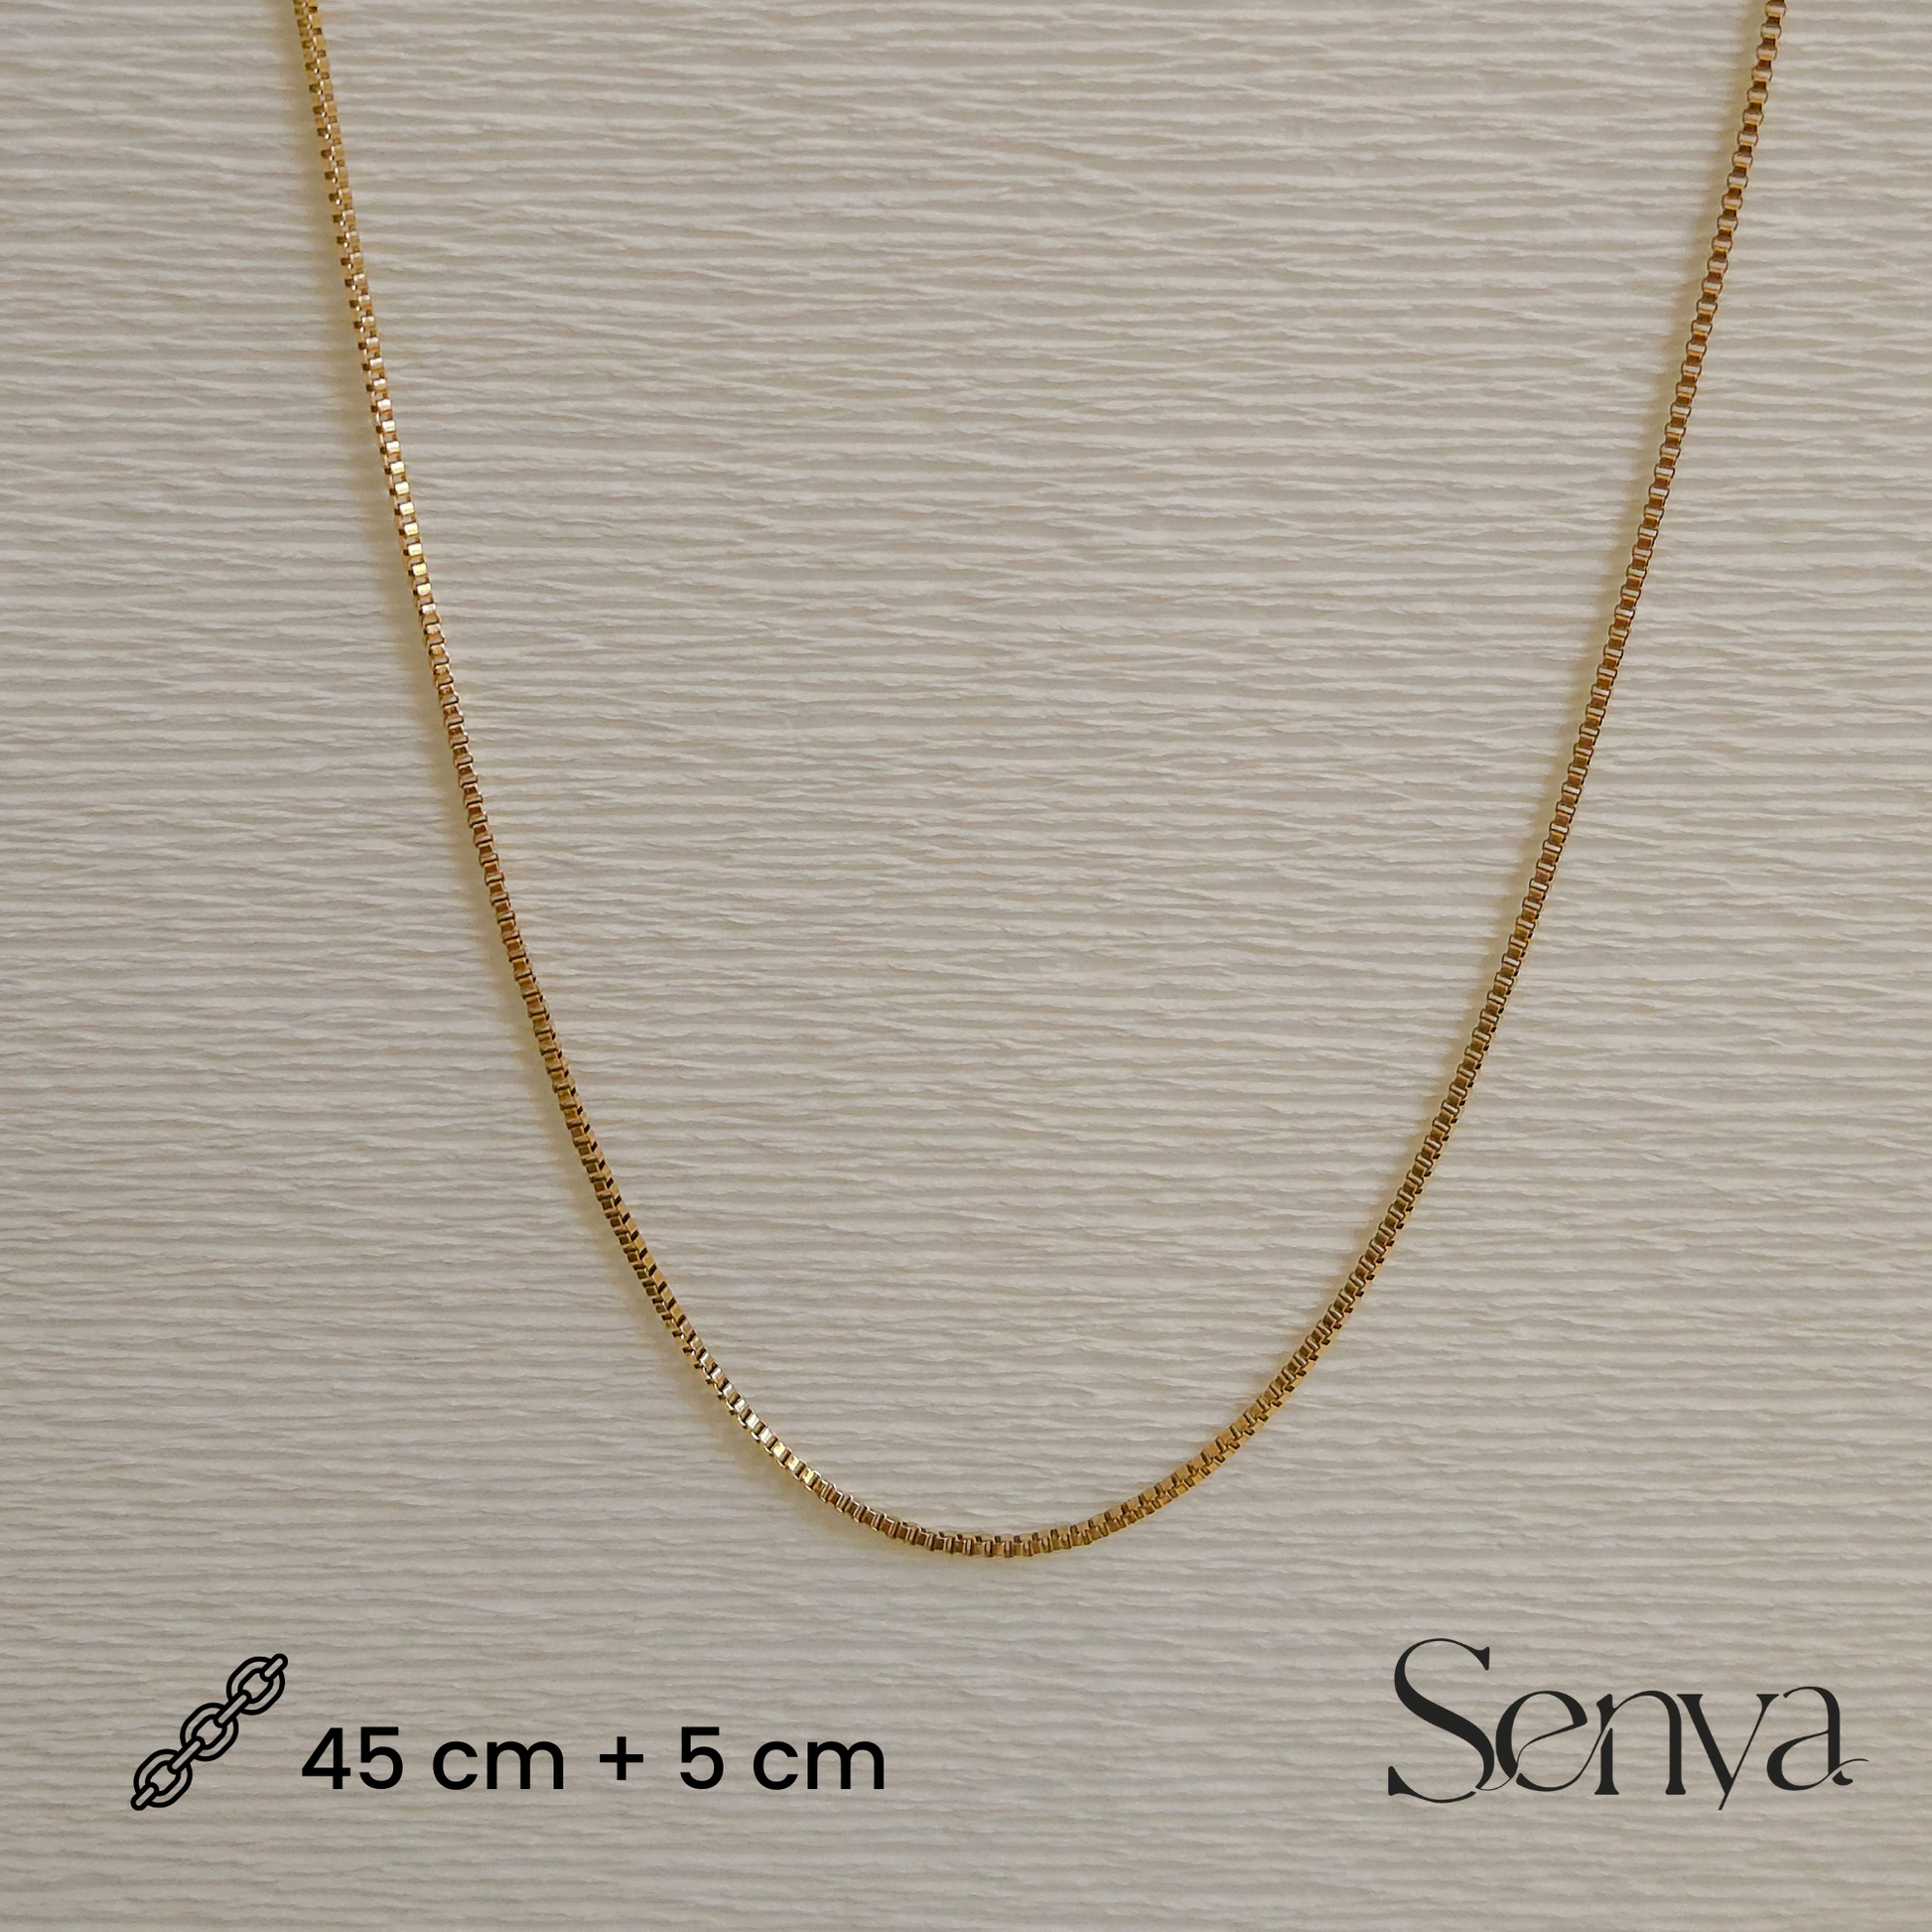 Chain Necklace, Women's Chain Necklace , Gold Chain Necklace , Stainless Steel Chain Necklace, Box Chain Necklace , Thick Chain Necklace, Layering Chain Necklace, Everyday Chain Necklace , Durable Chain Necklace , Adjustable Chain Necklace, Hypoallergenic Chain Necklace, Different Types of Chain Necklaces, Best Chain Necklace for Layering, How to Choose a Chain Necklace,